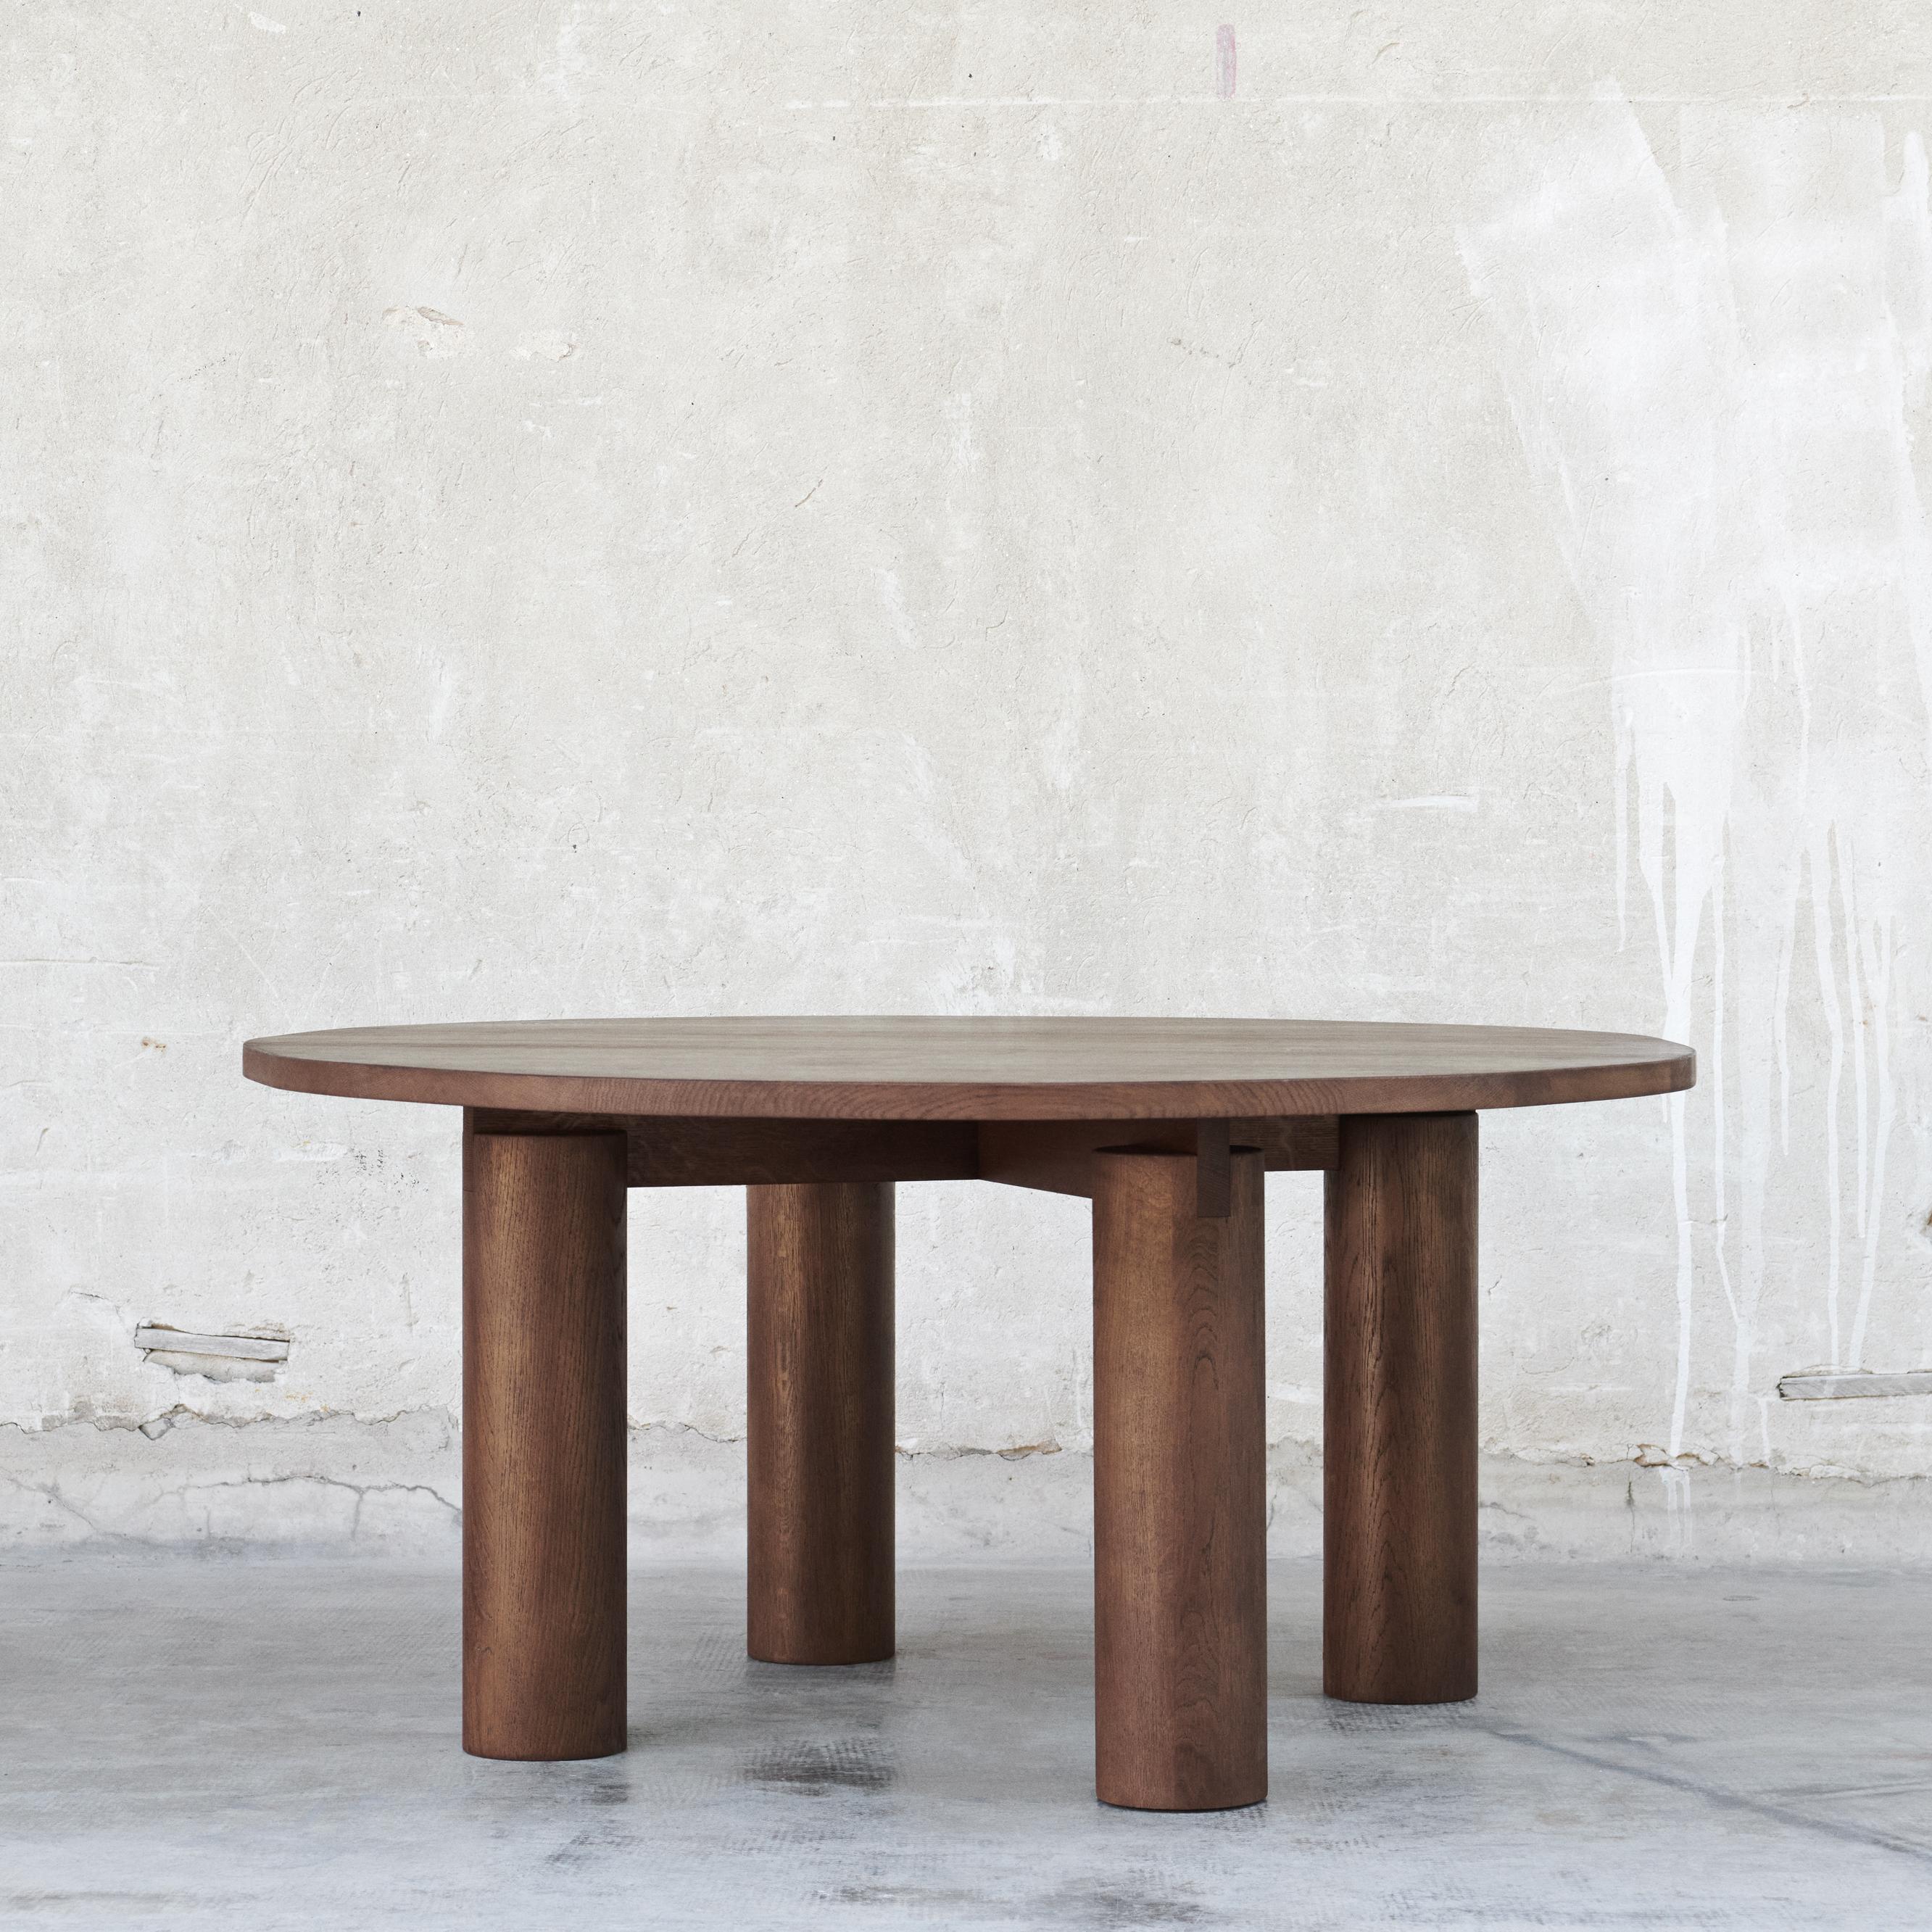 NLM Dining Table by Fora Projects 
Designed by Nikolaj Lorentz Mentze (Studio 0405)

Material: Oak wood 
Model shown: Dark brown
Brown surface treatment with non-toxic hardwax oil

Dimensions:

H: 72, L: 155, W: 145